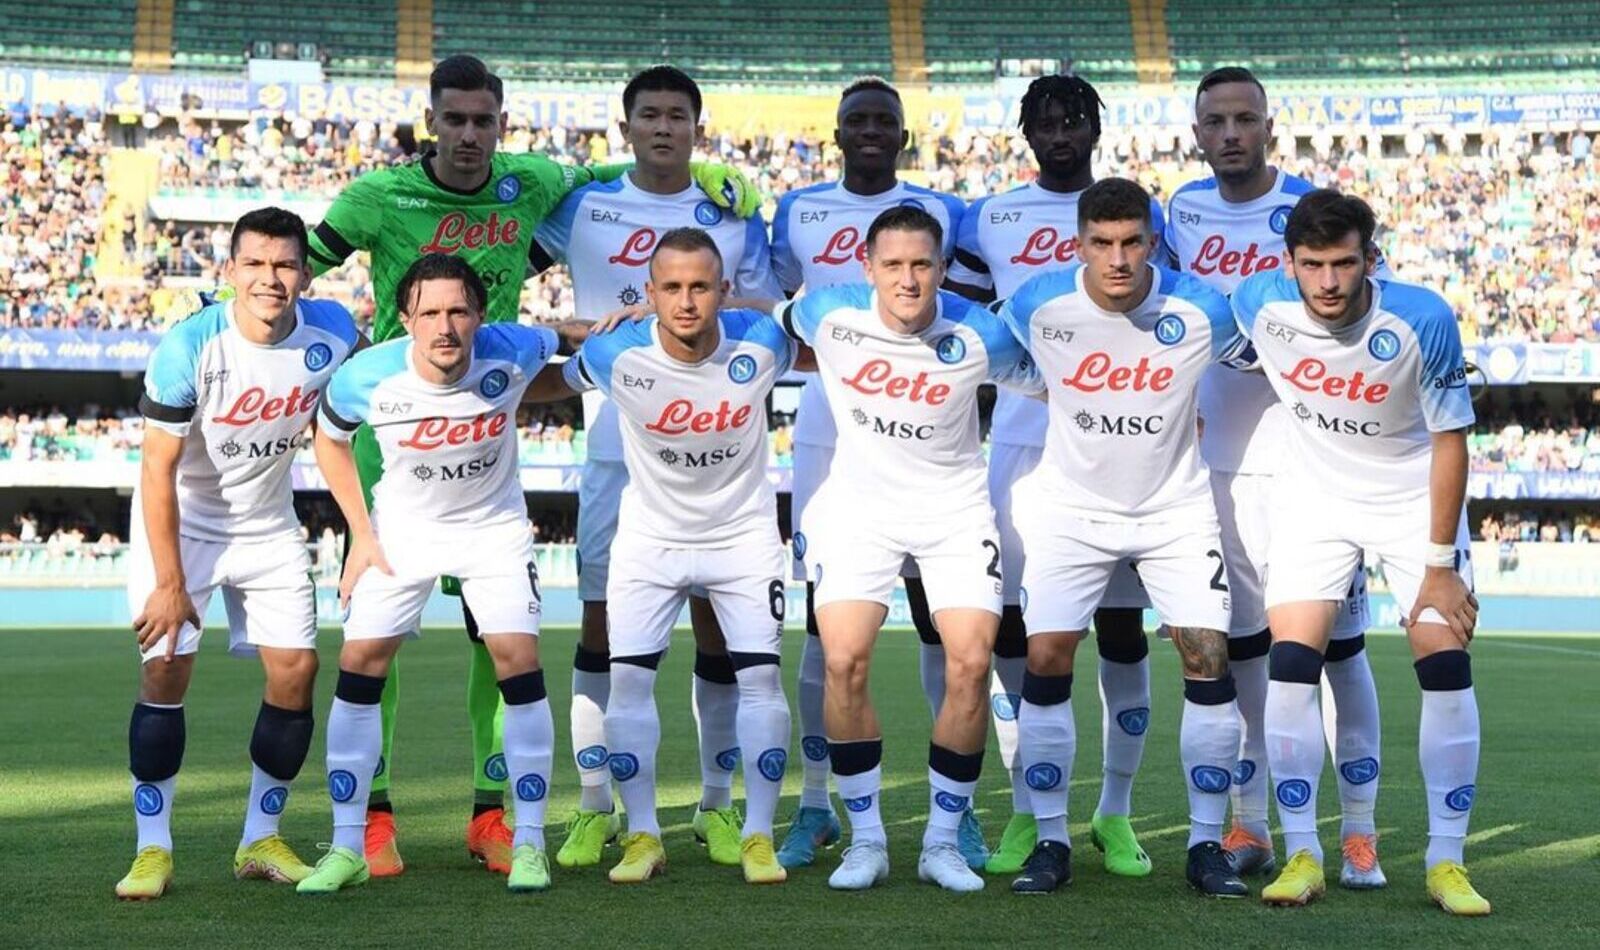 The Napoli team poses for the photo before the match against Hellas Verona